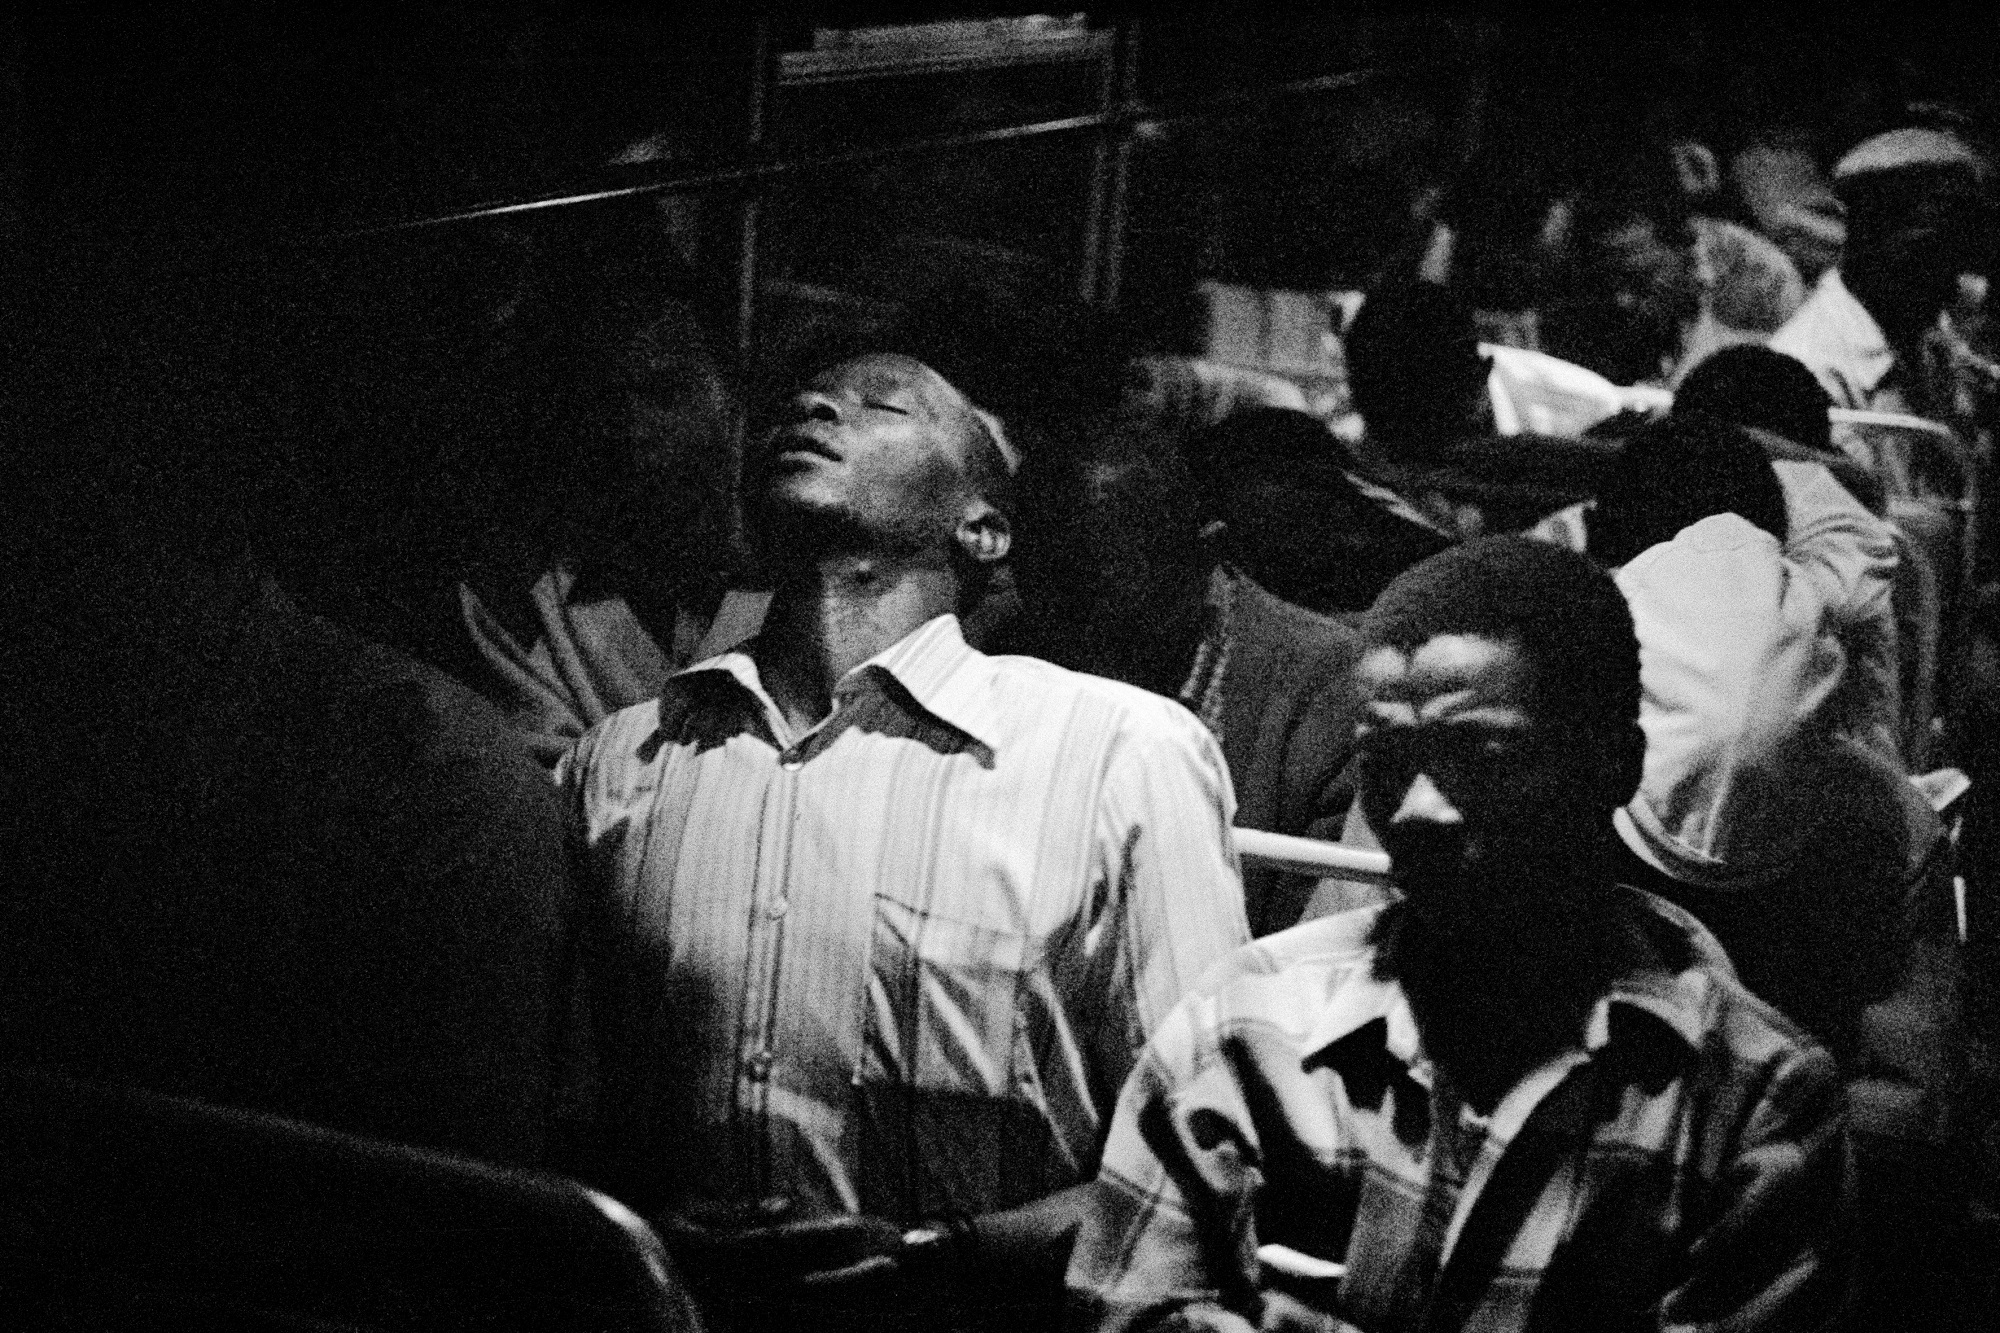 Going home: Marabastad-Waterval route: for most of the people in this bus, the cycle will start again tomorrow between 2 and 3am, 1984 [Photograph by David Goldblatt]